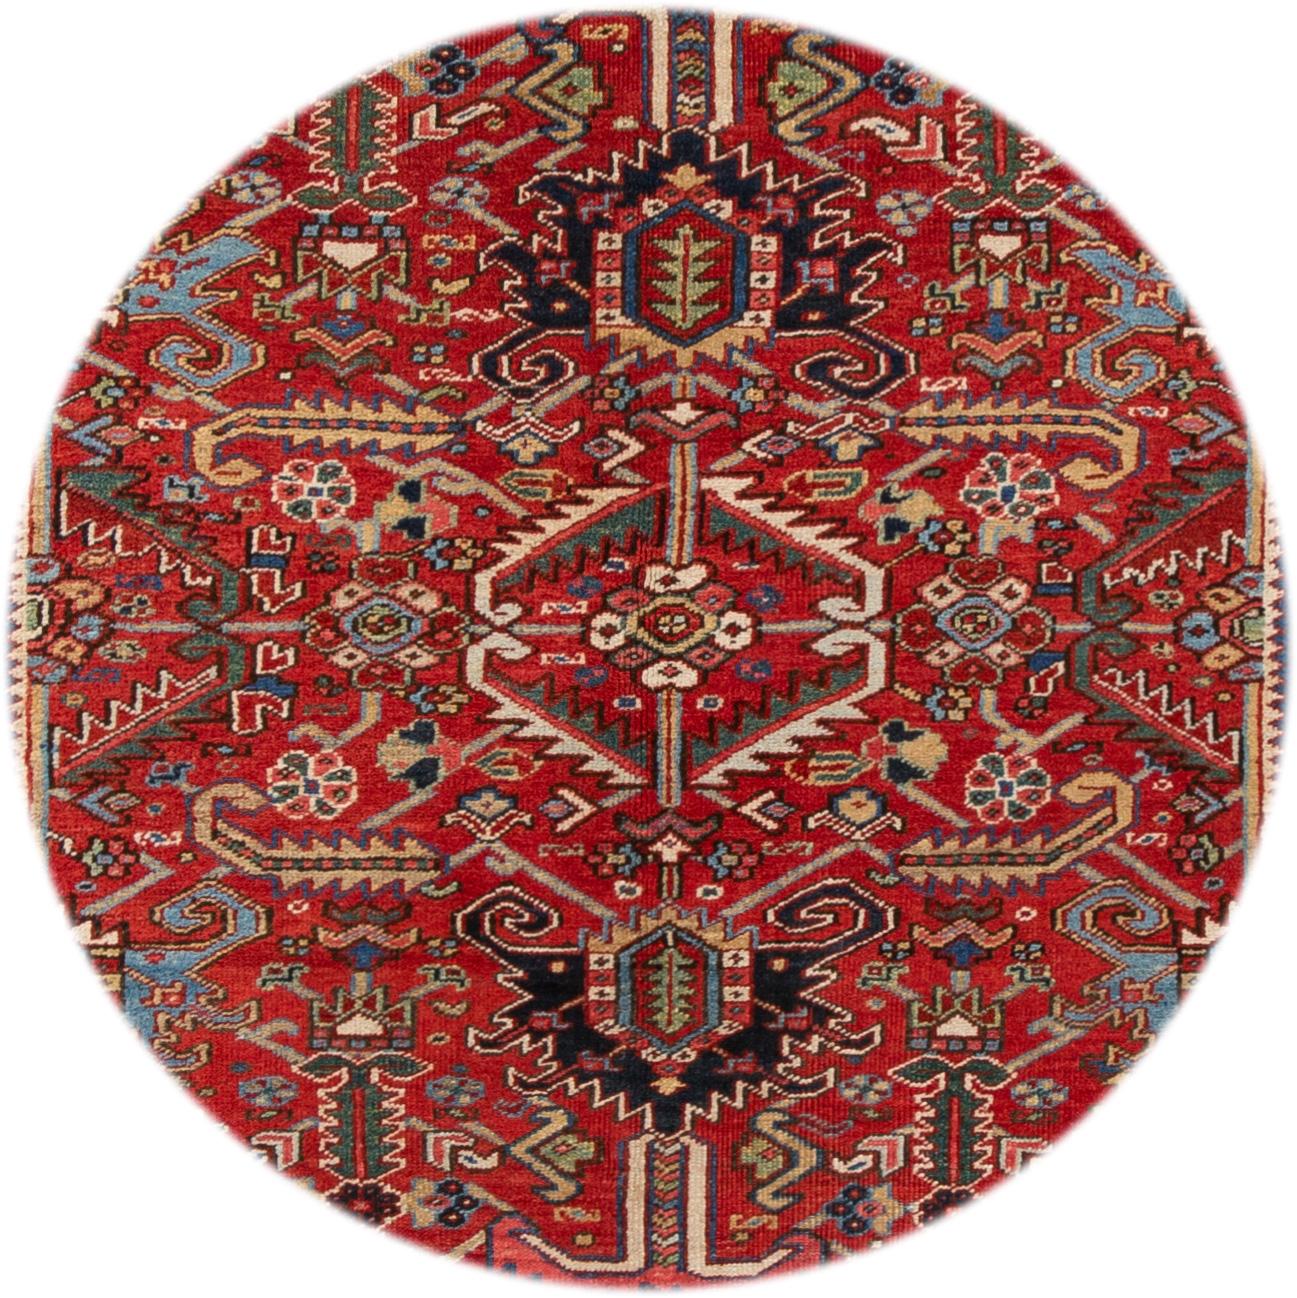 Beautiful hand knotted vintage Heriz wool rug. This rug has a red field and black border with multicolored accents in all-over floral design,

circa 1920

This rug measures 7' 0